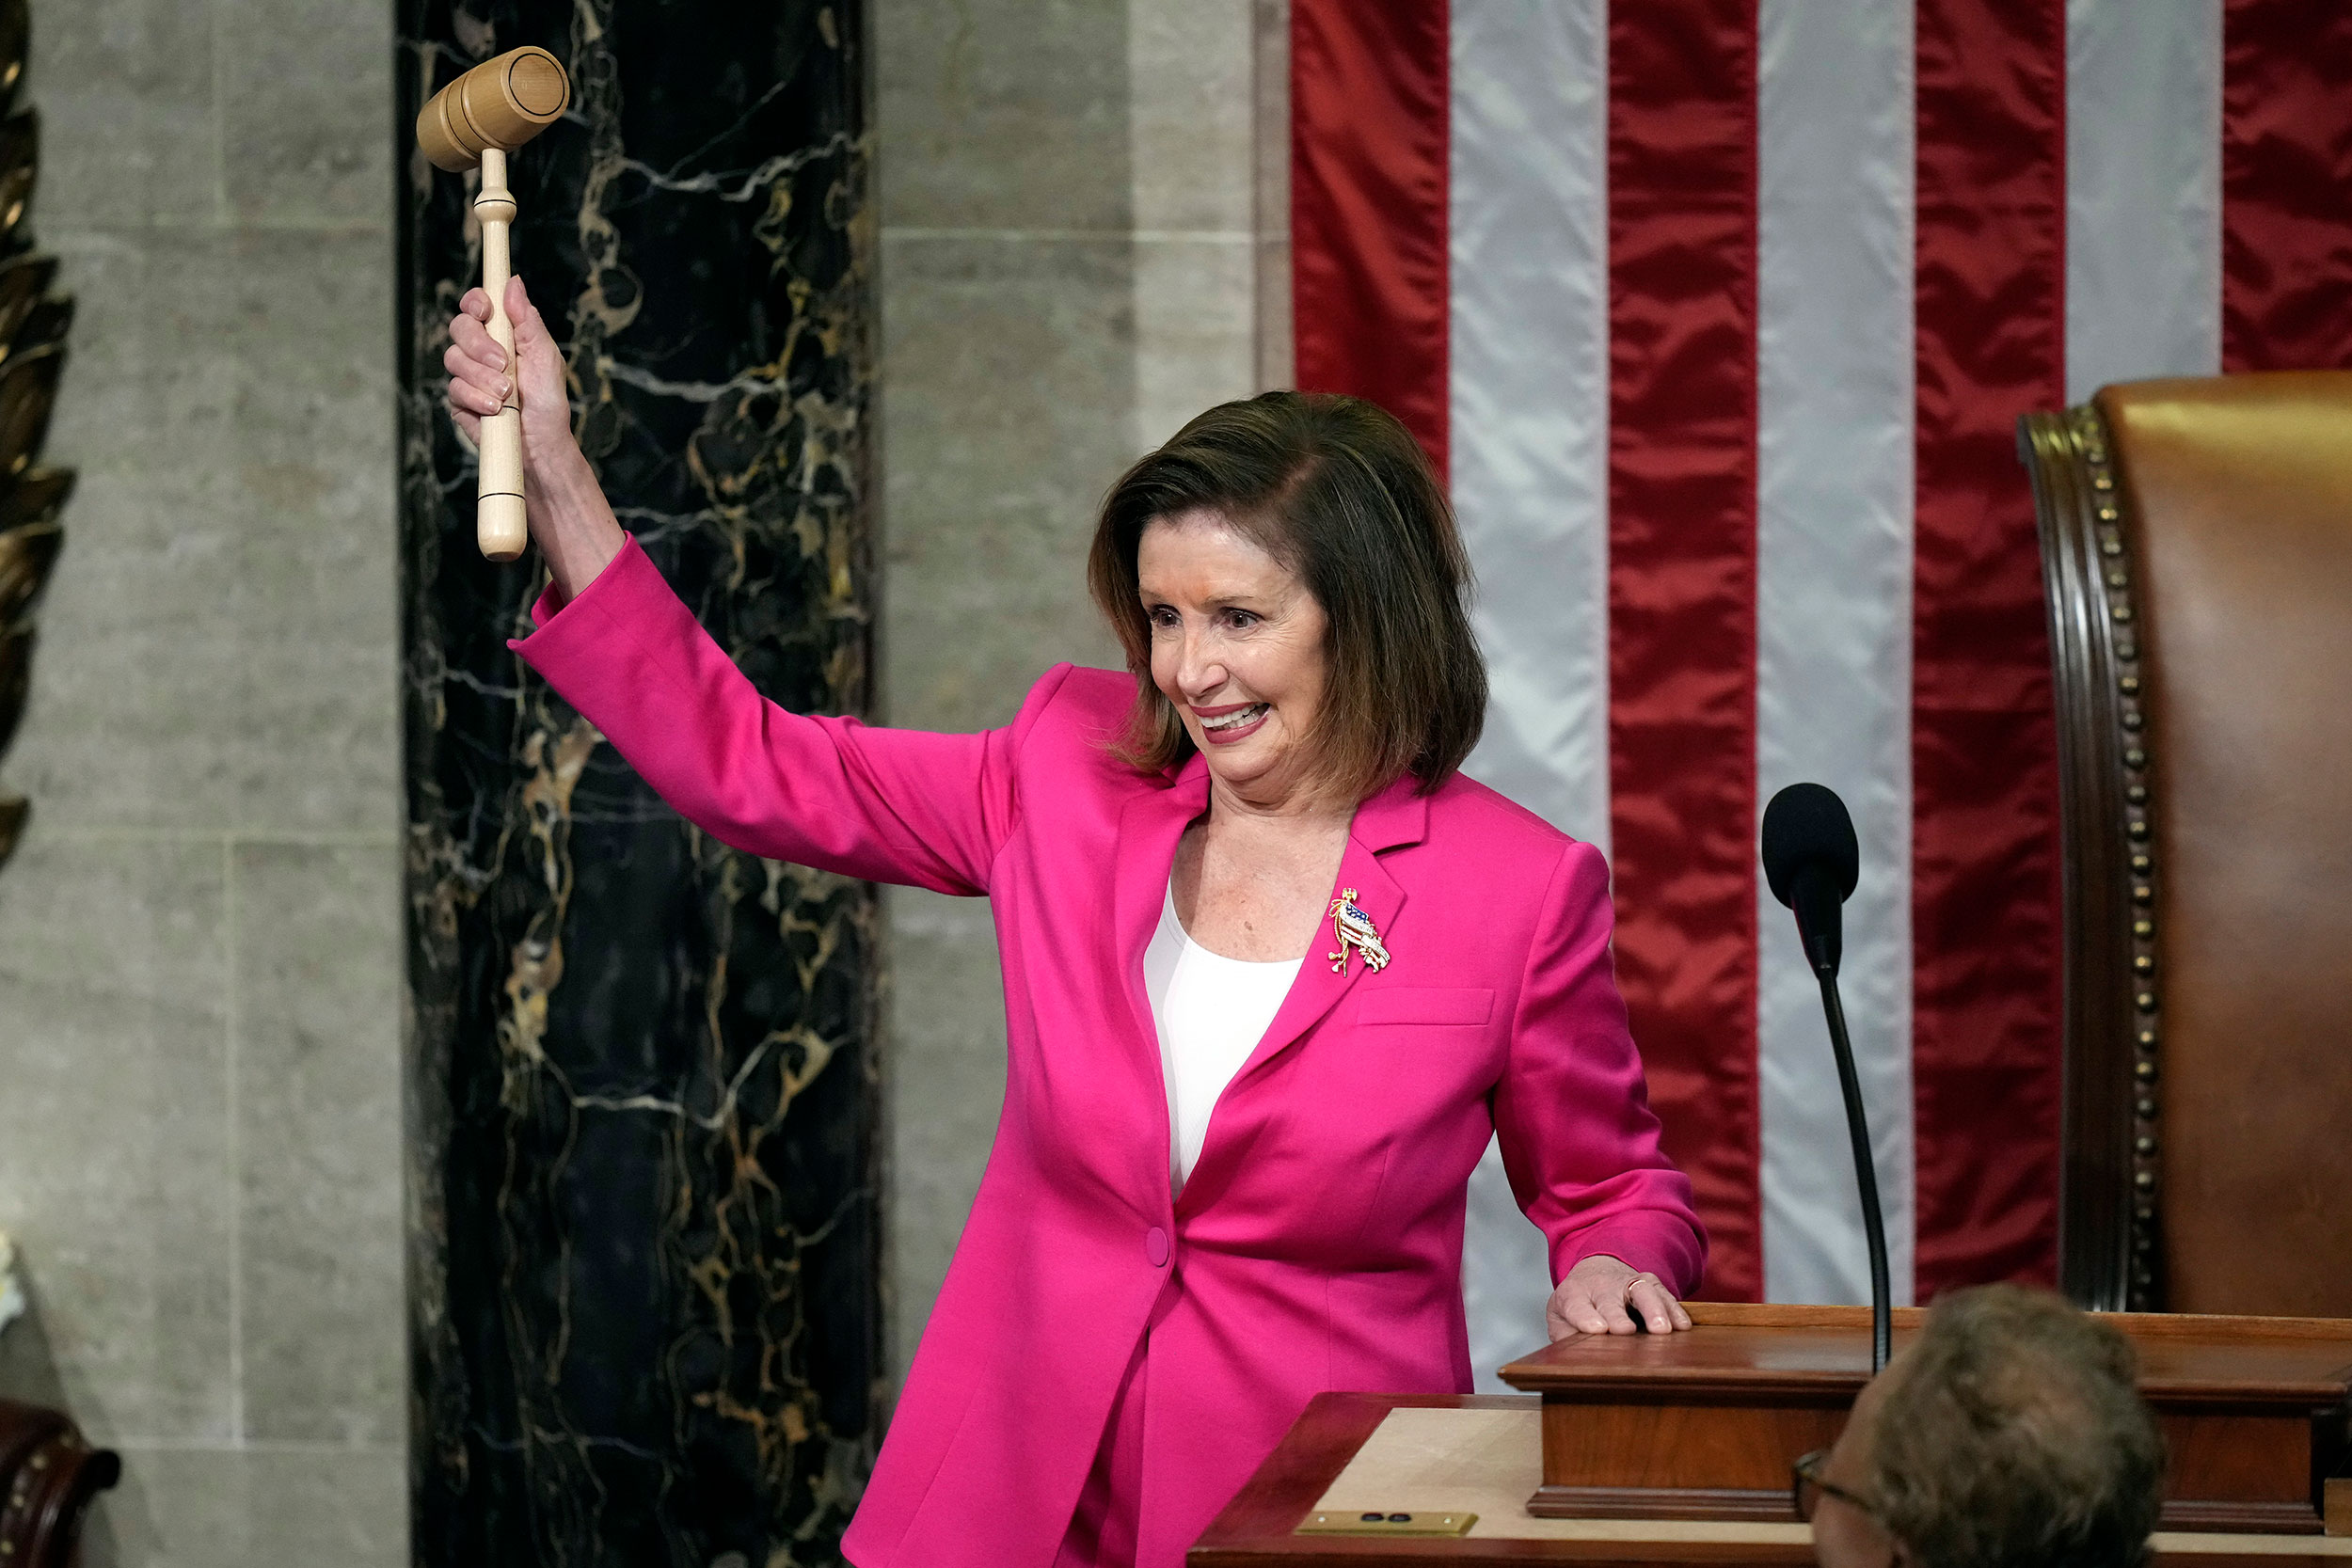 Outgoing House Speaker Nancy Pelosi holds the gavel as she calls the House to order on Tuesday.